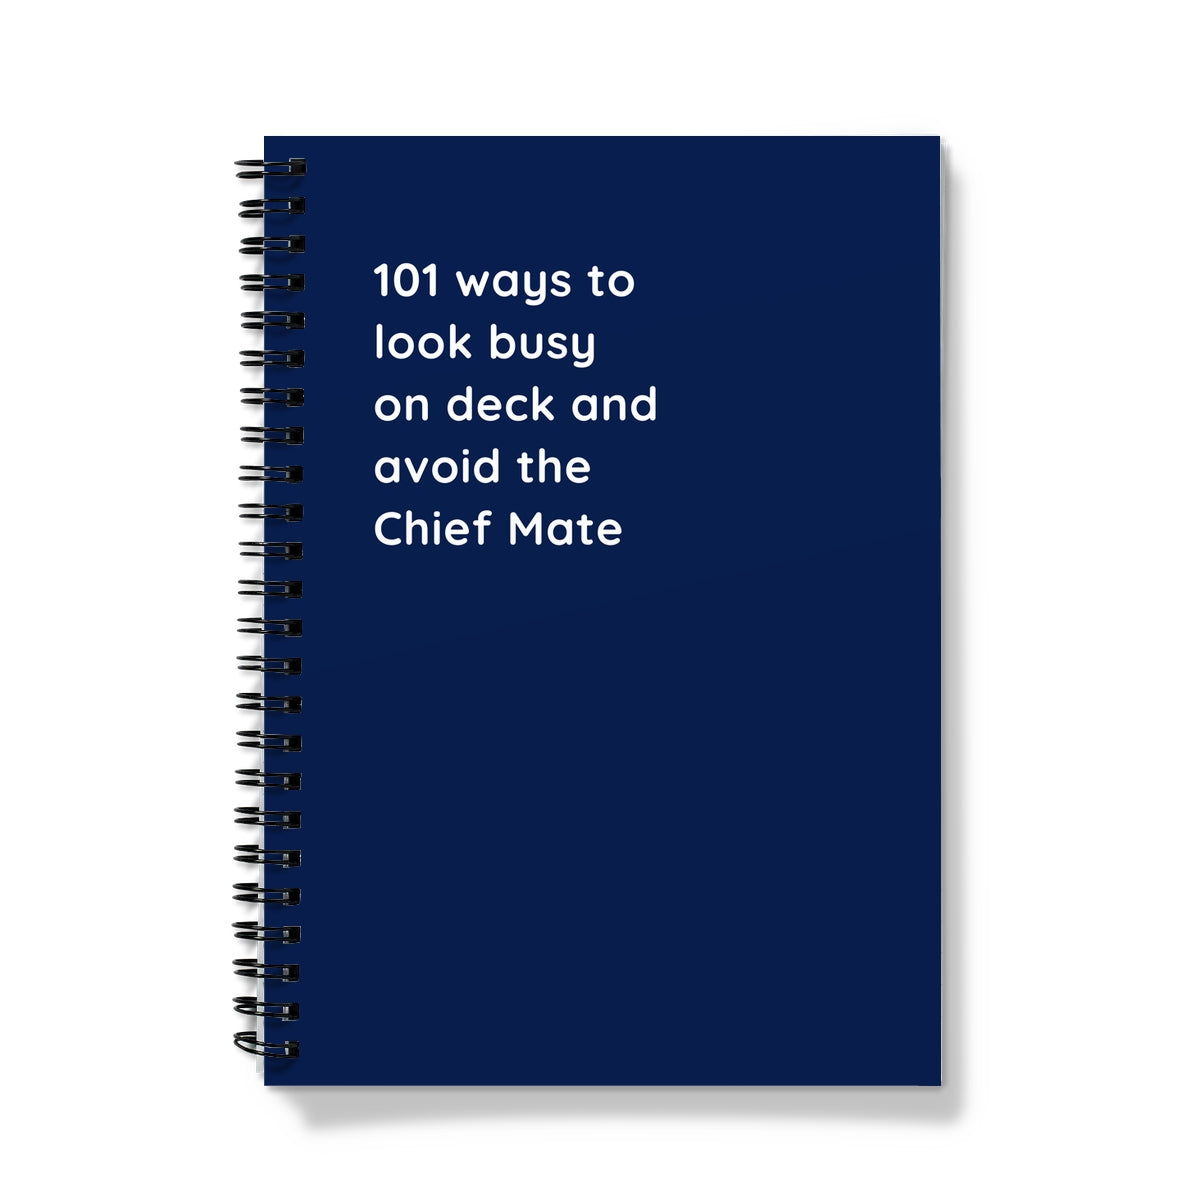 Softcover Notebook (101 ways to look busy on deck and avoid the Chief Mate)